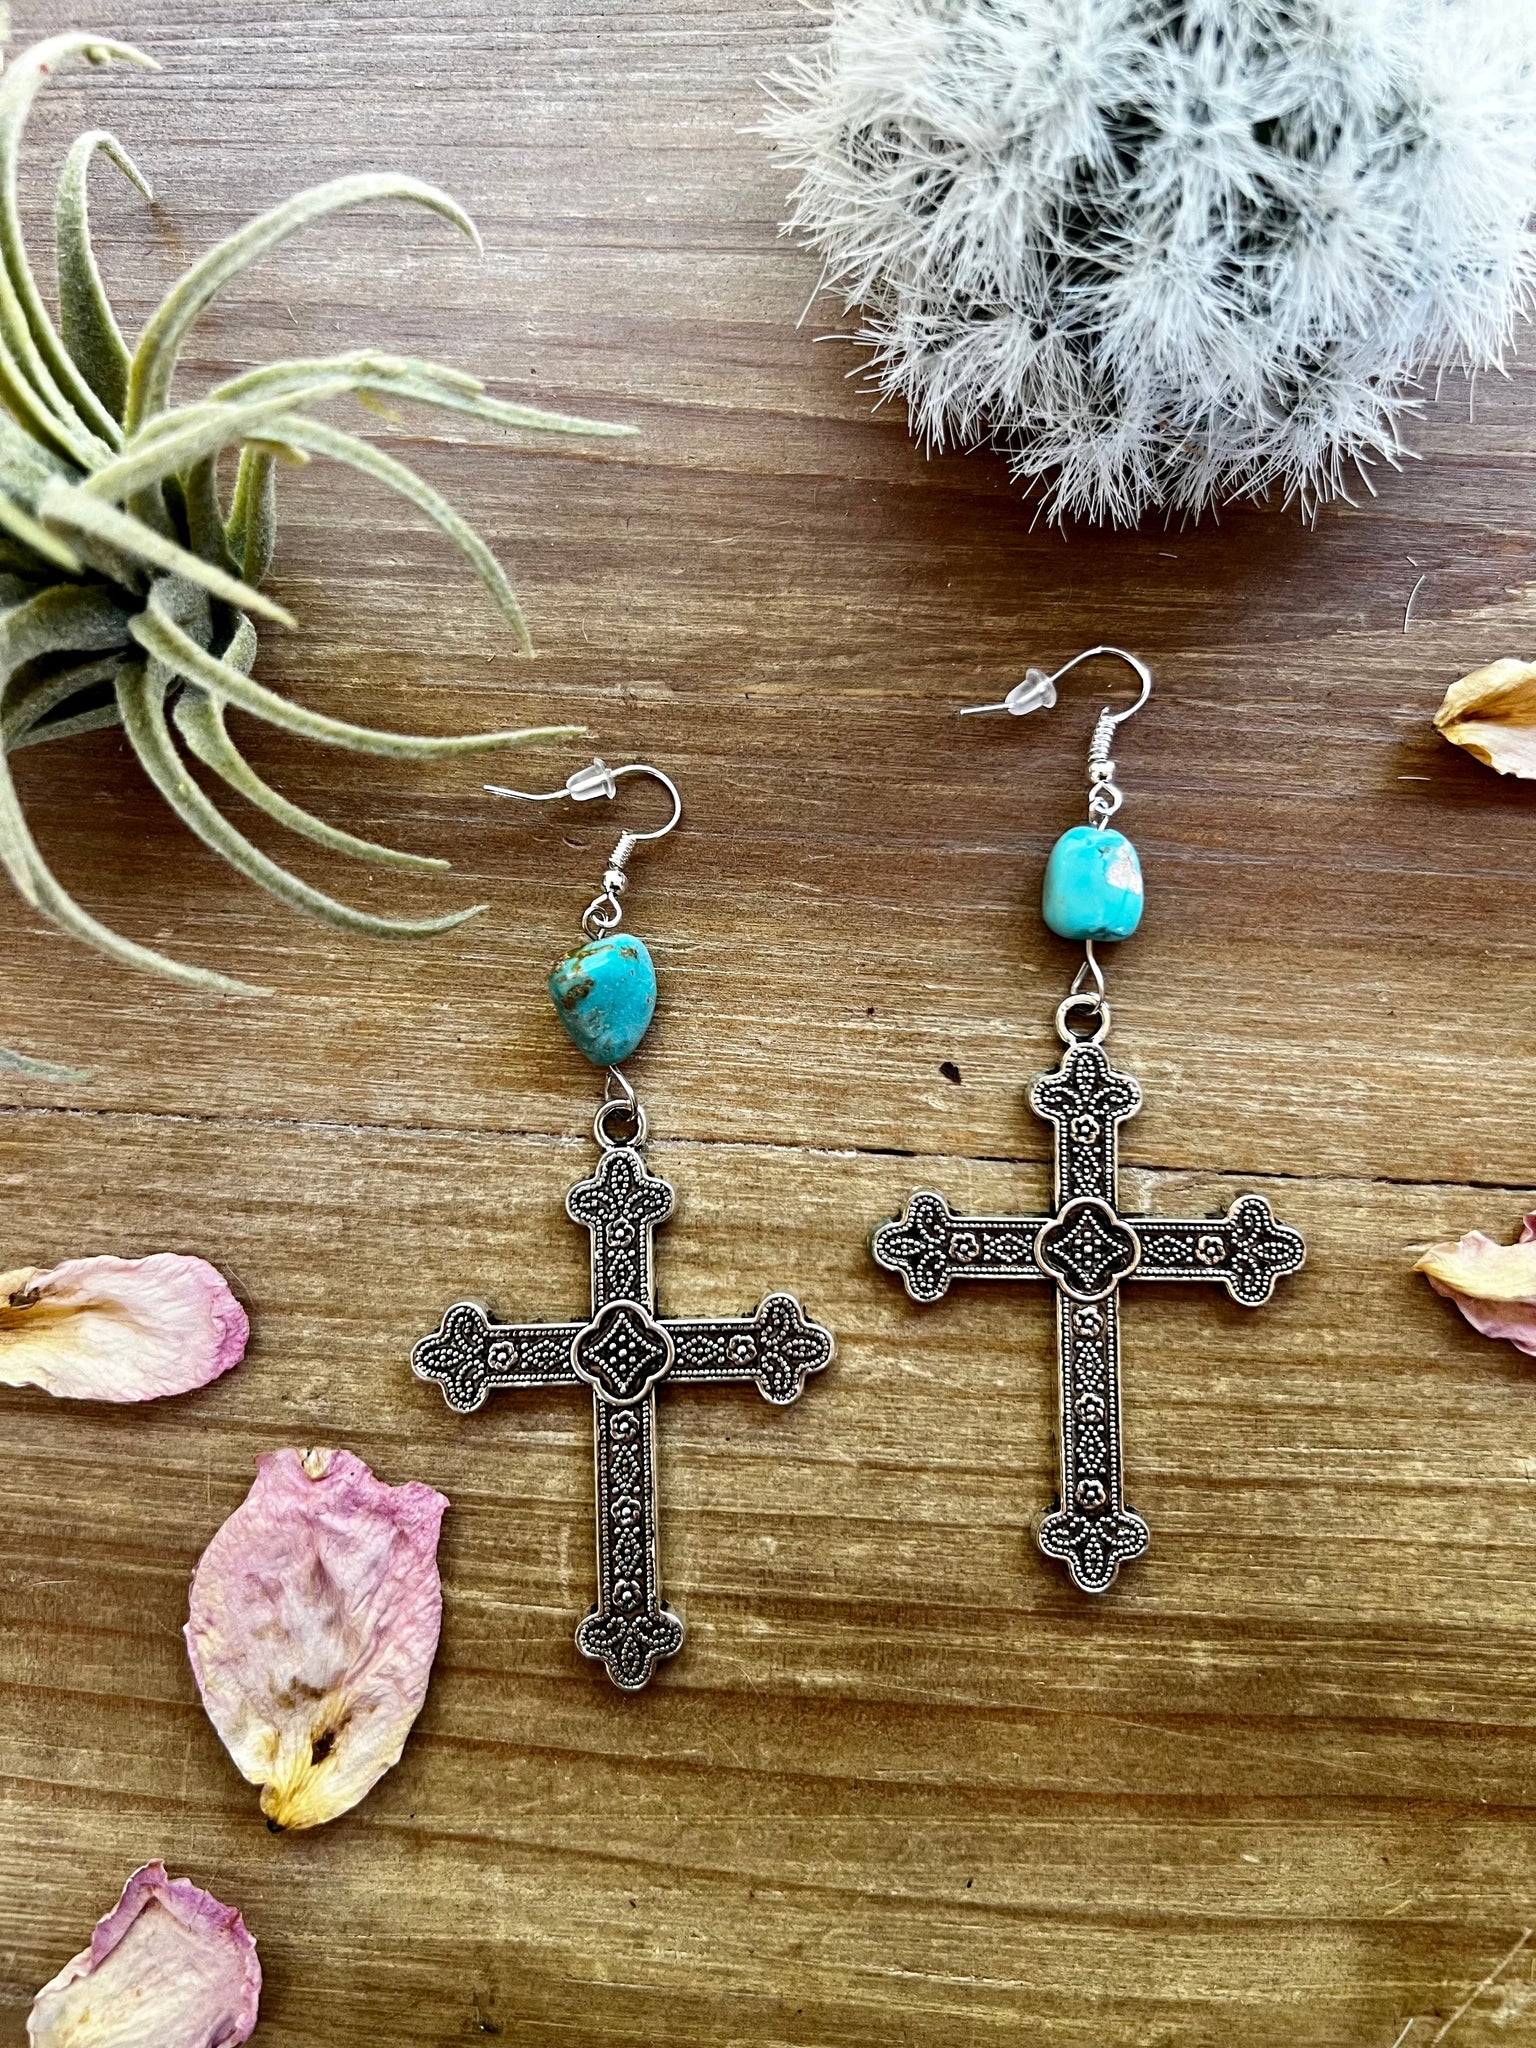 Cross earrings with real turquoise